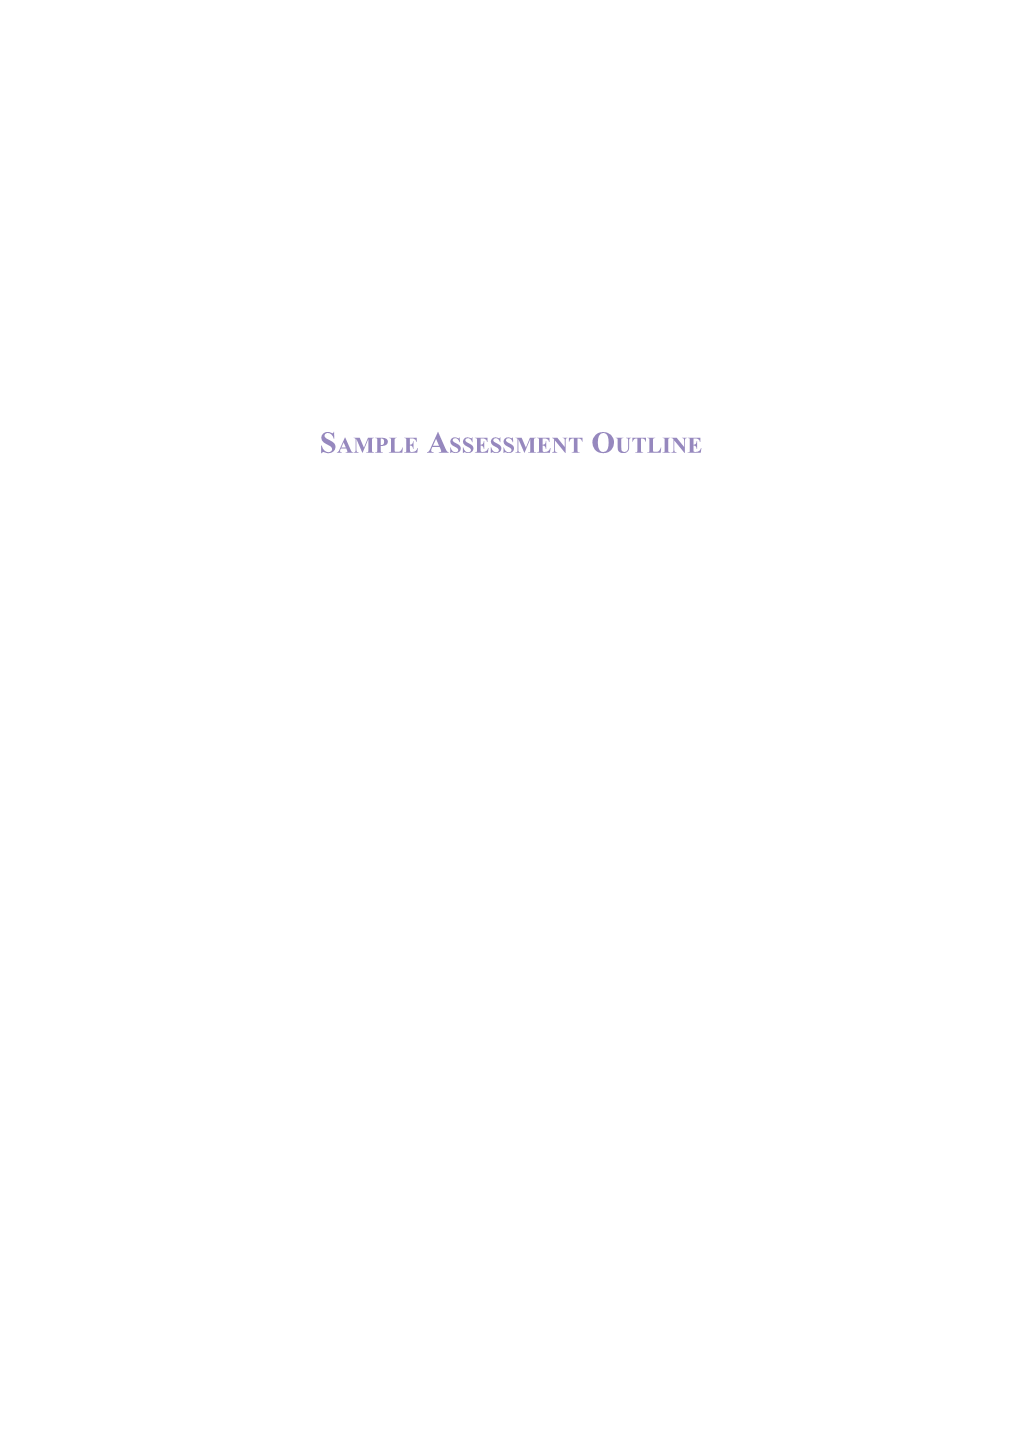 School Curriculum and Standards Authority, 2014 s10